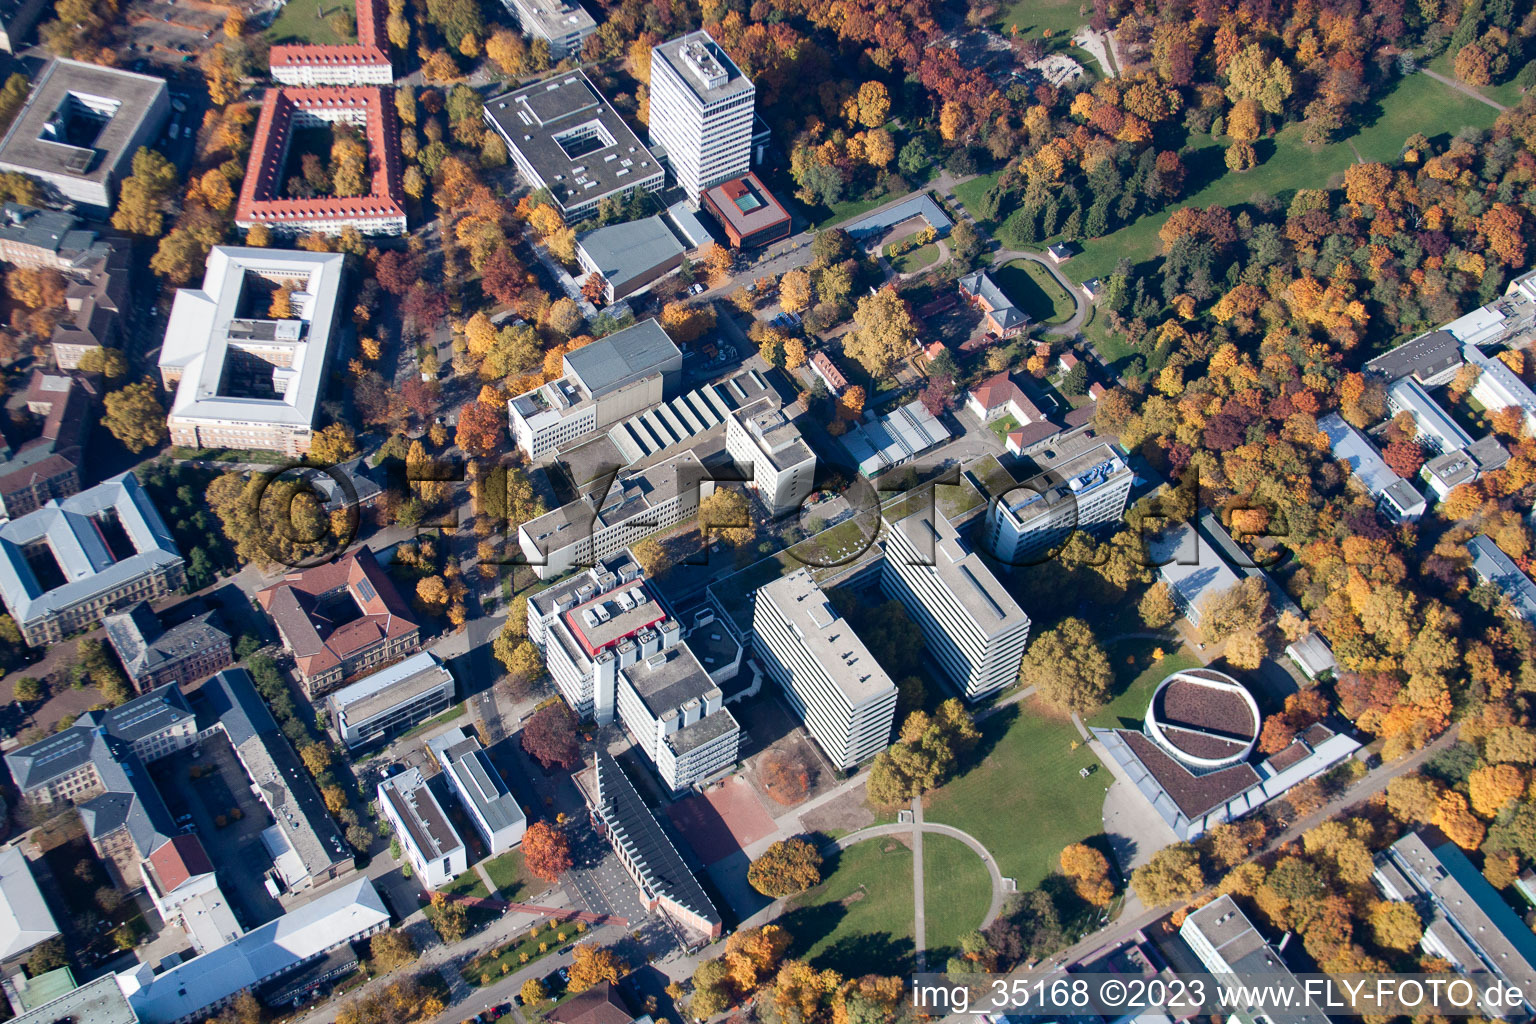 KIT University in the district Innenstadt-Ost in Karlsruhe in the state Baden-Wuerttemberg, Germany from above